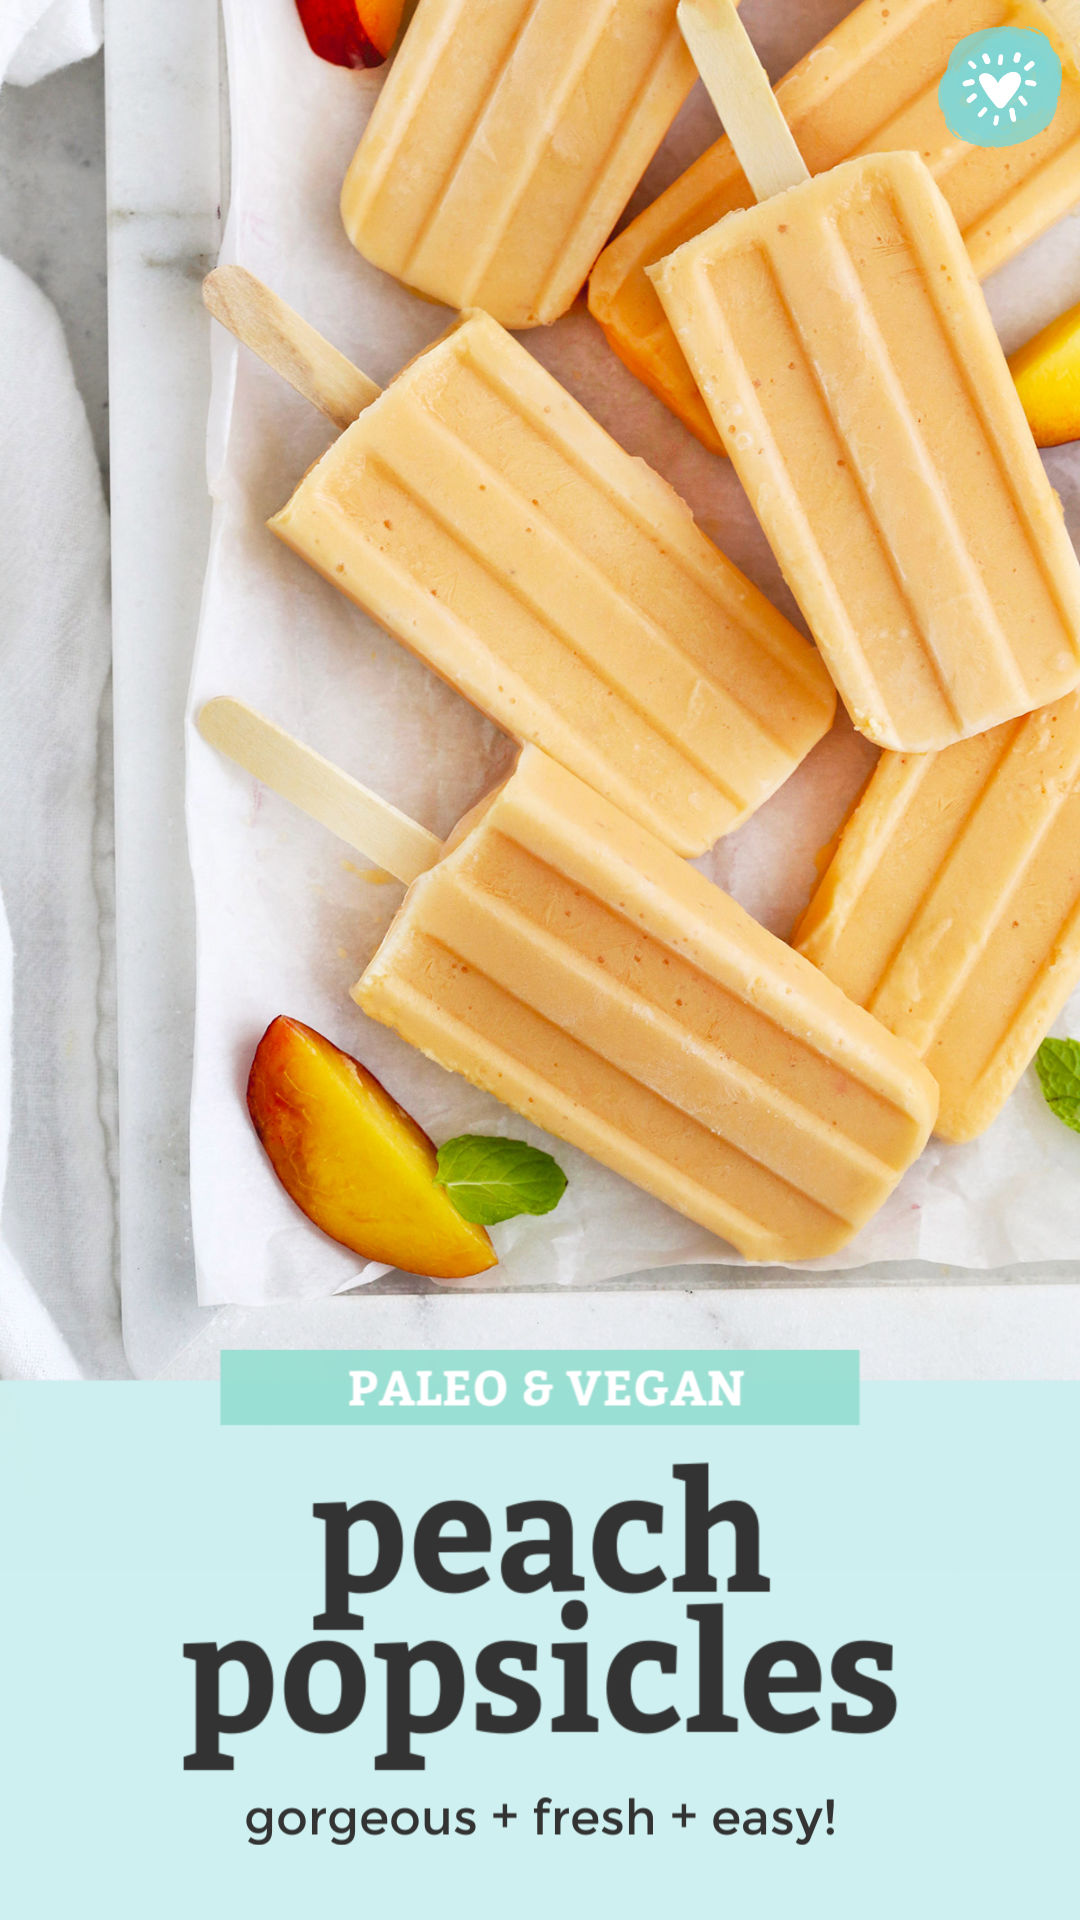 Overhead view of peach popsicles on a marble serving platter with peach slices and mint leaves with text overlay that reads "Paleo & Vegan Peach Popsicles. gorgeous + fresh + easy!"